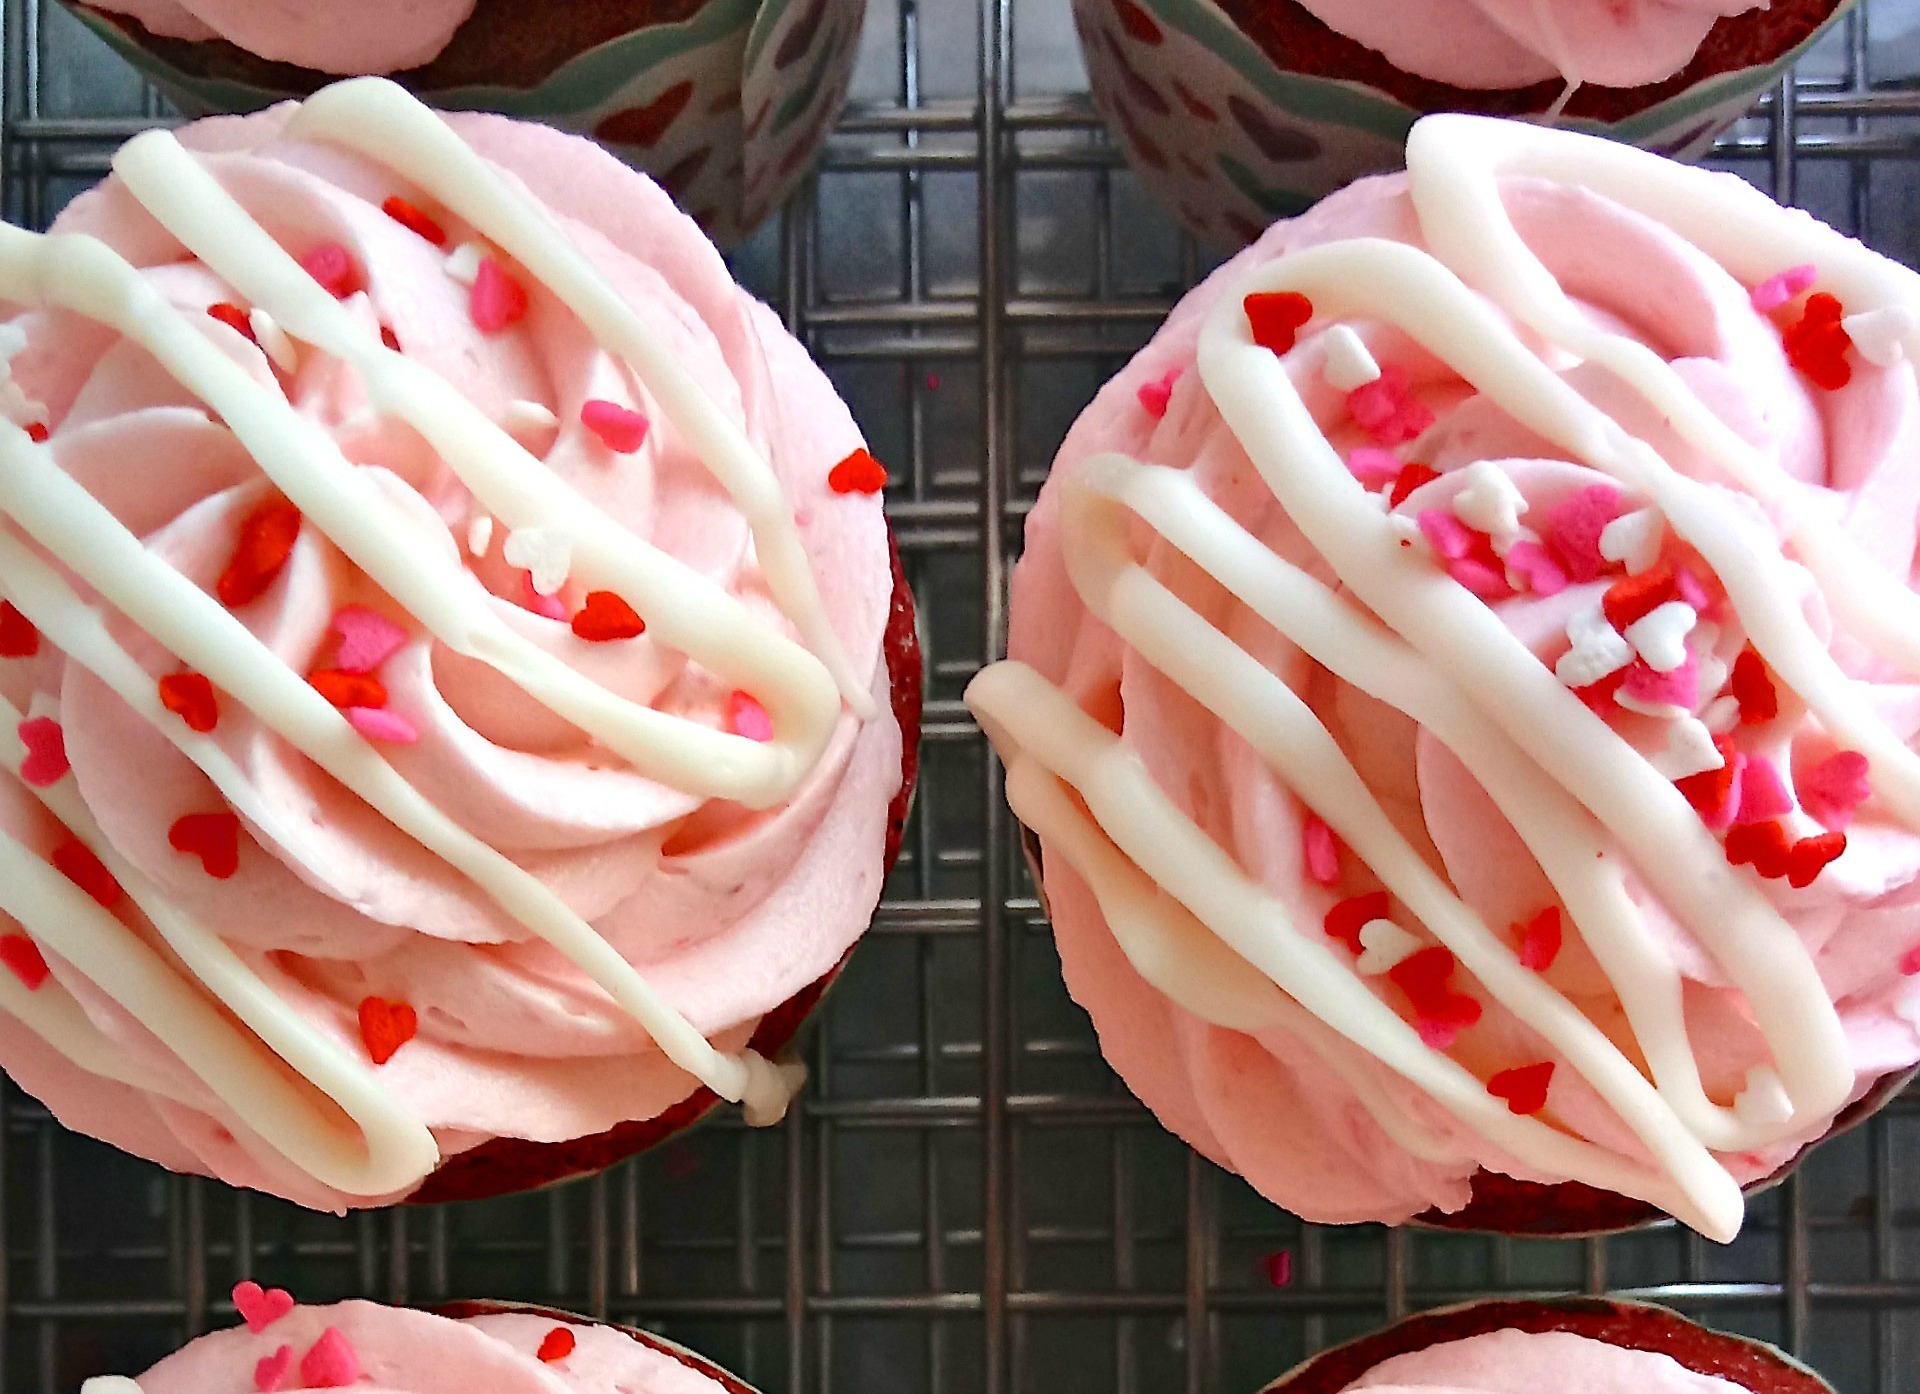 2 Pink Valentines Day cupcakes with a white chocolate drizzle and sprinkles on a wire rack